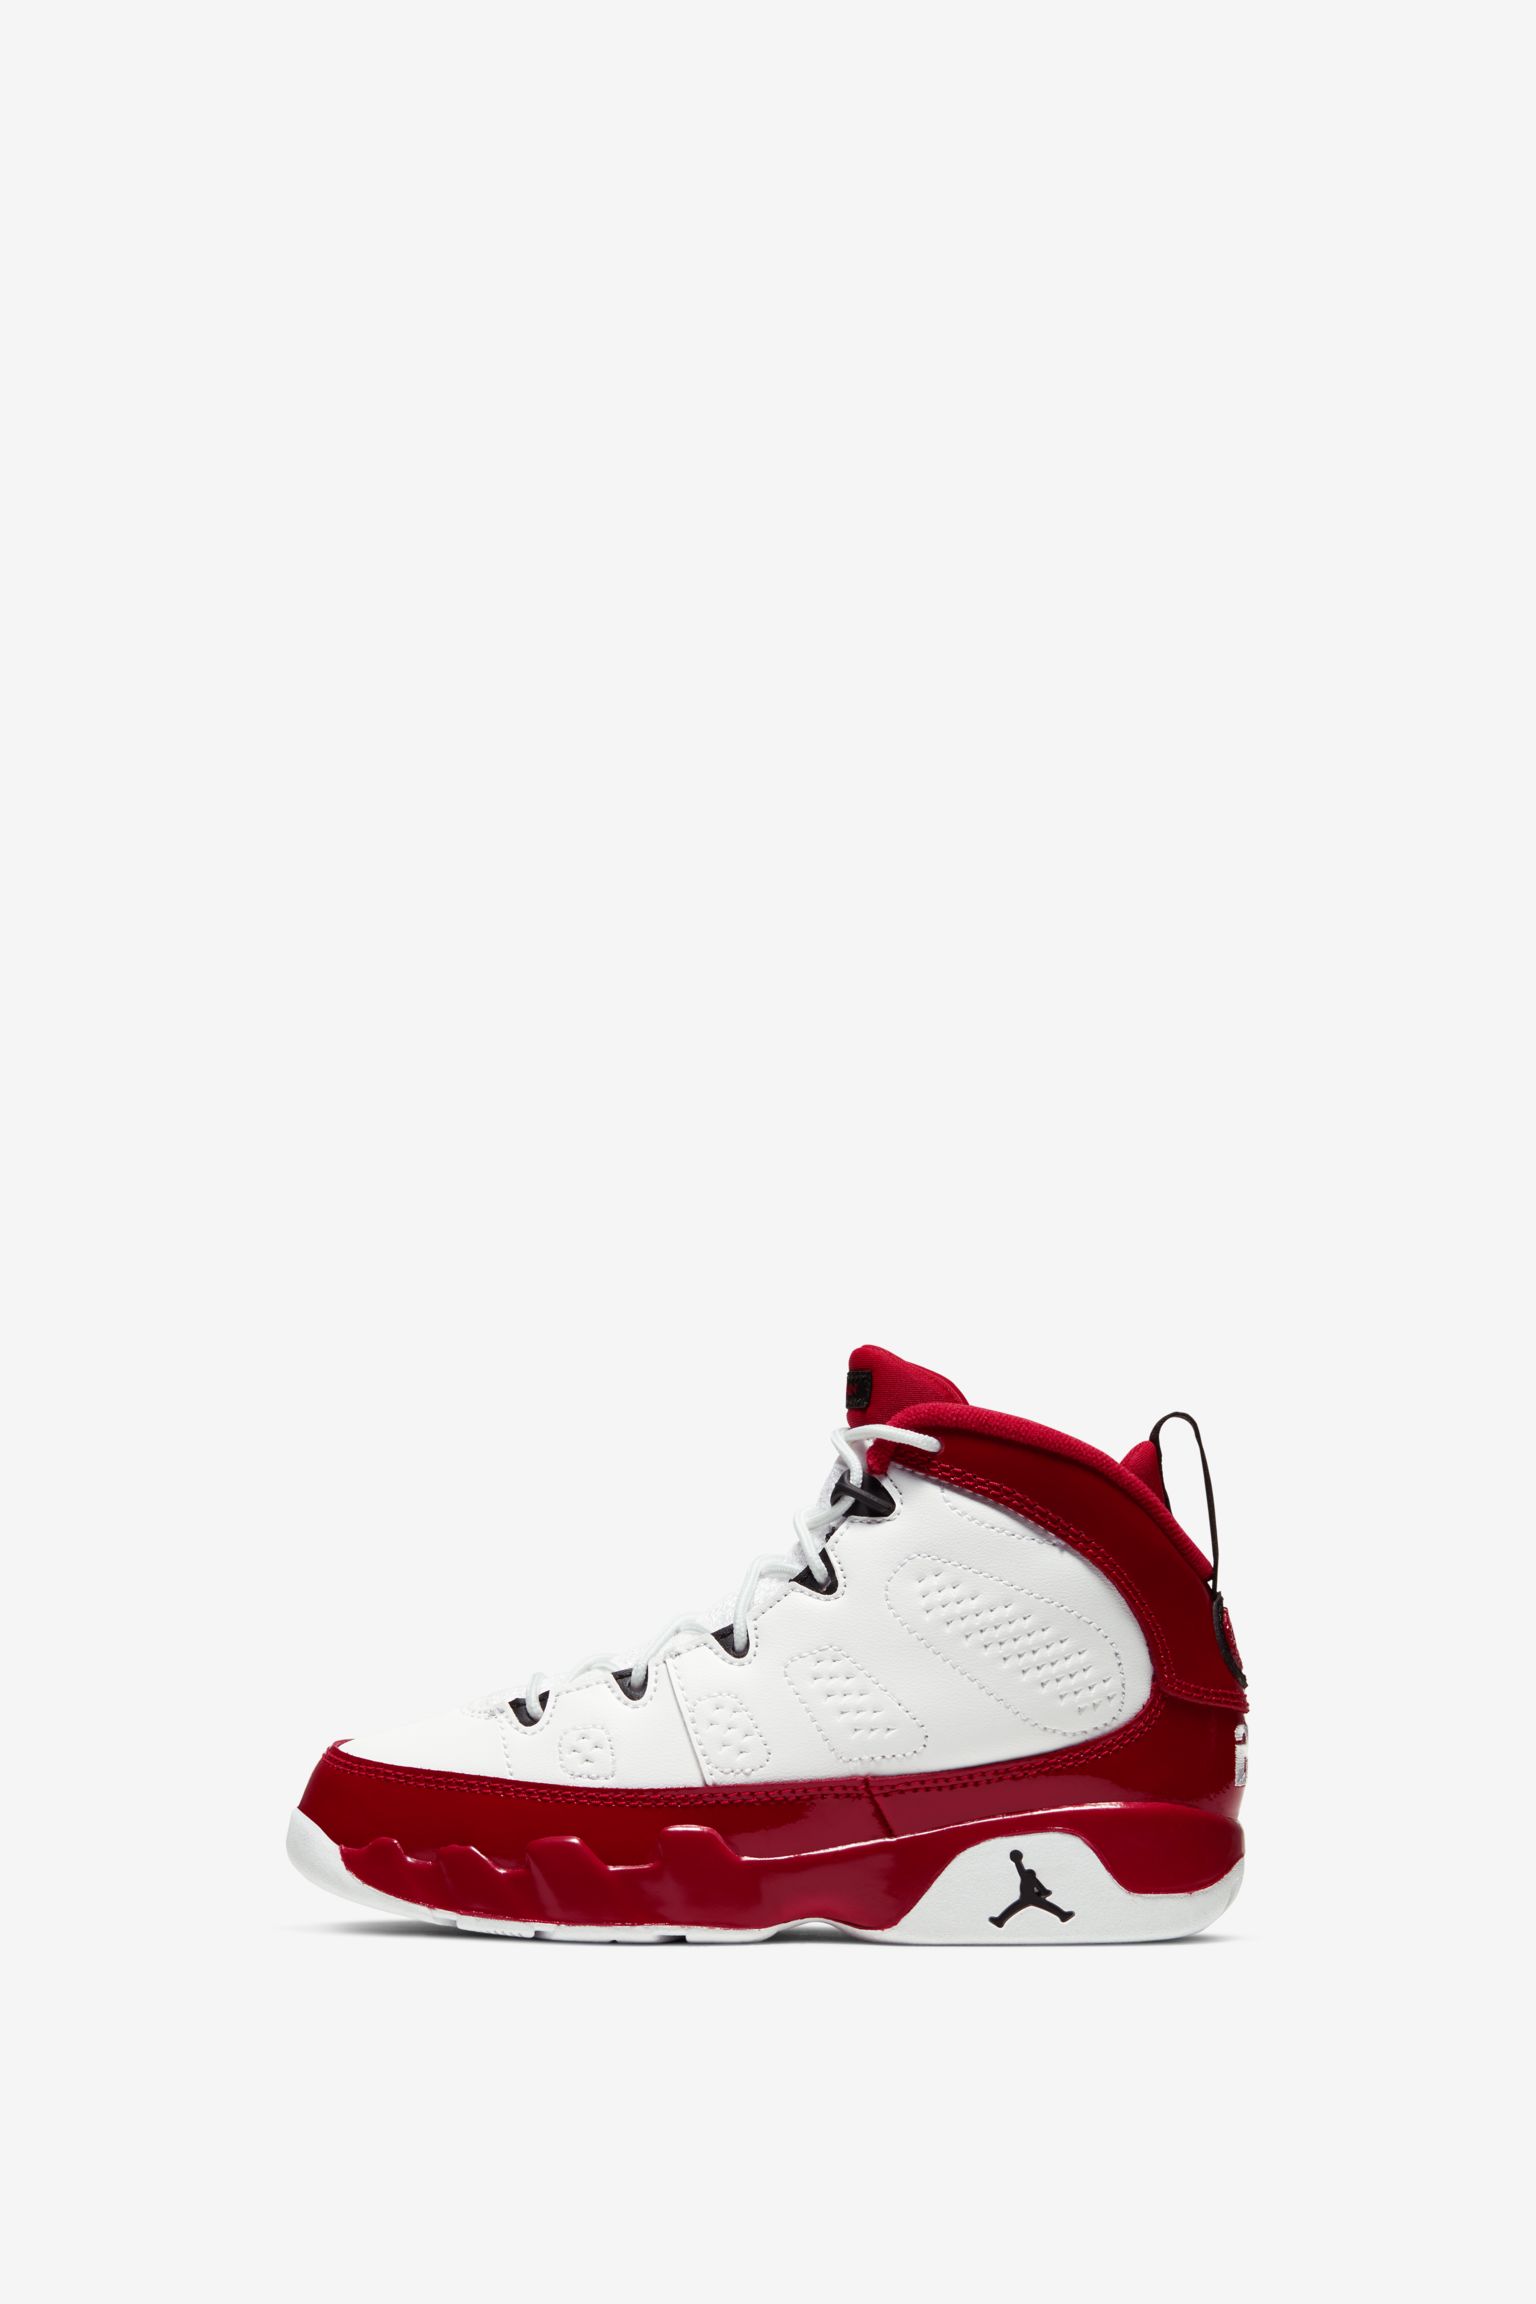 nike jordan shoes white and red